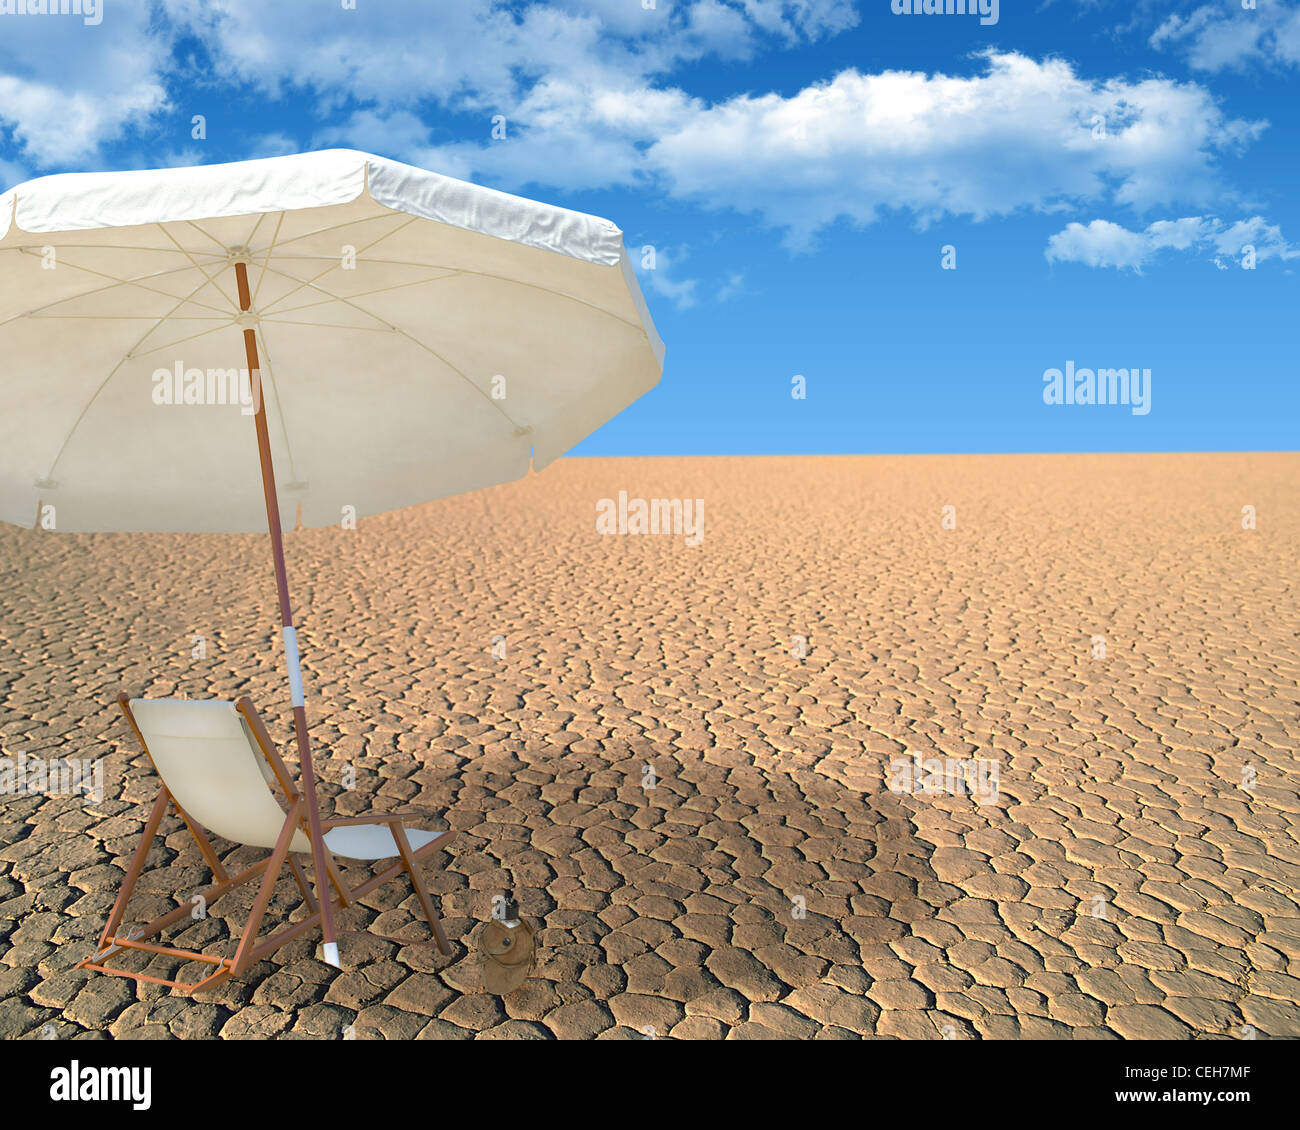 White umbrella and wooden chair in desert Stock Photo